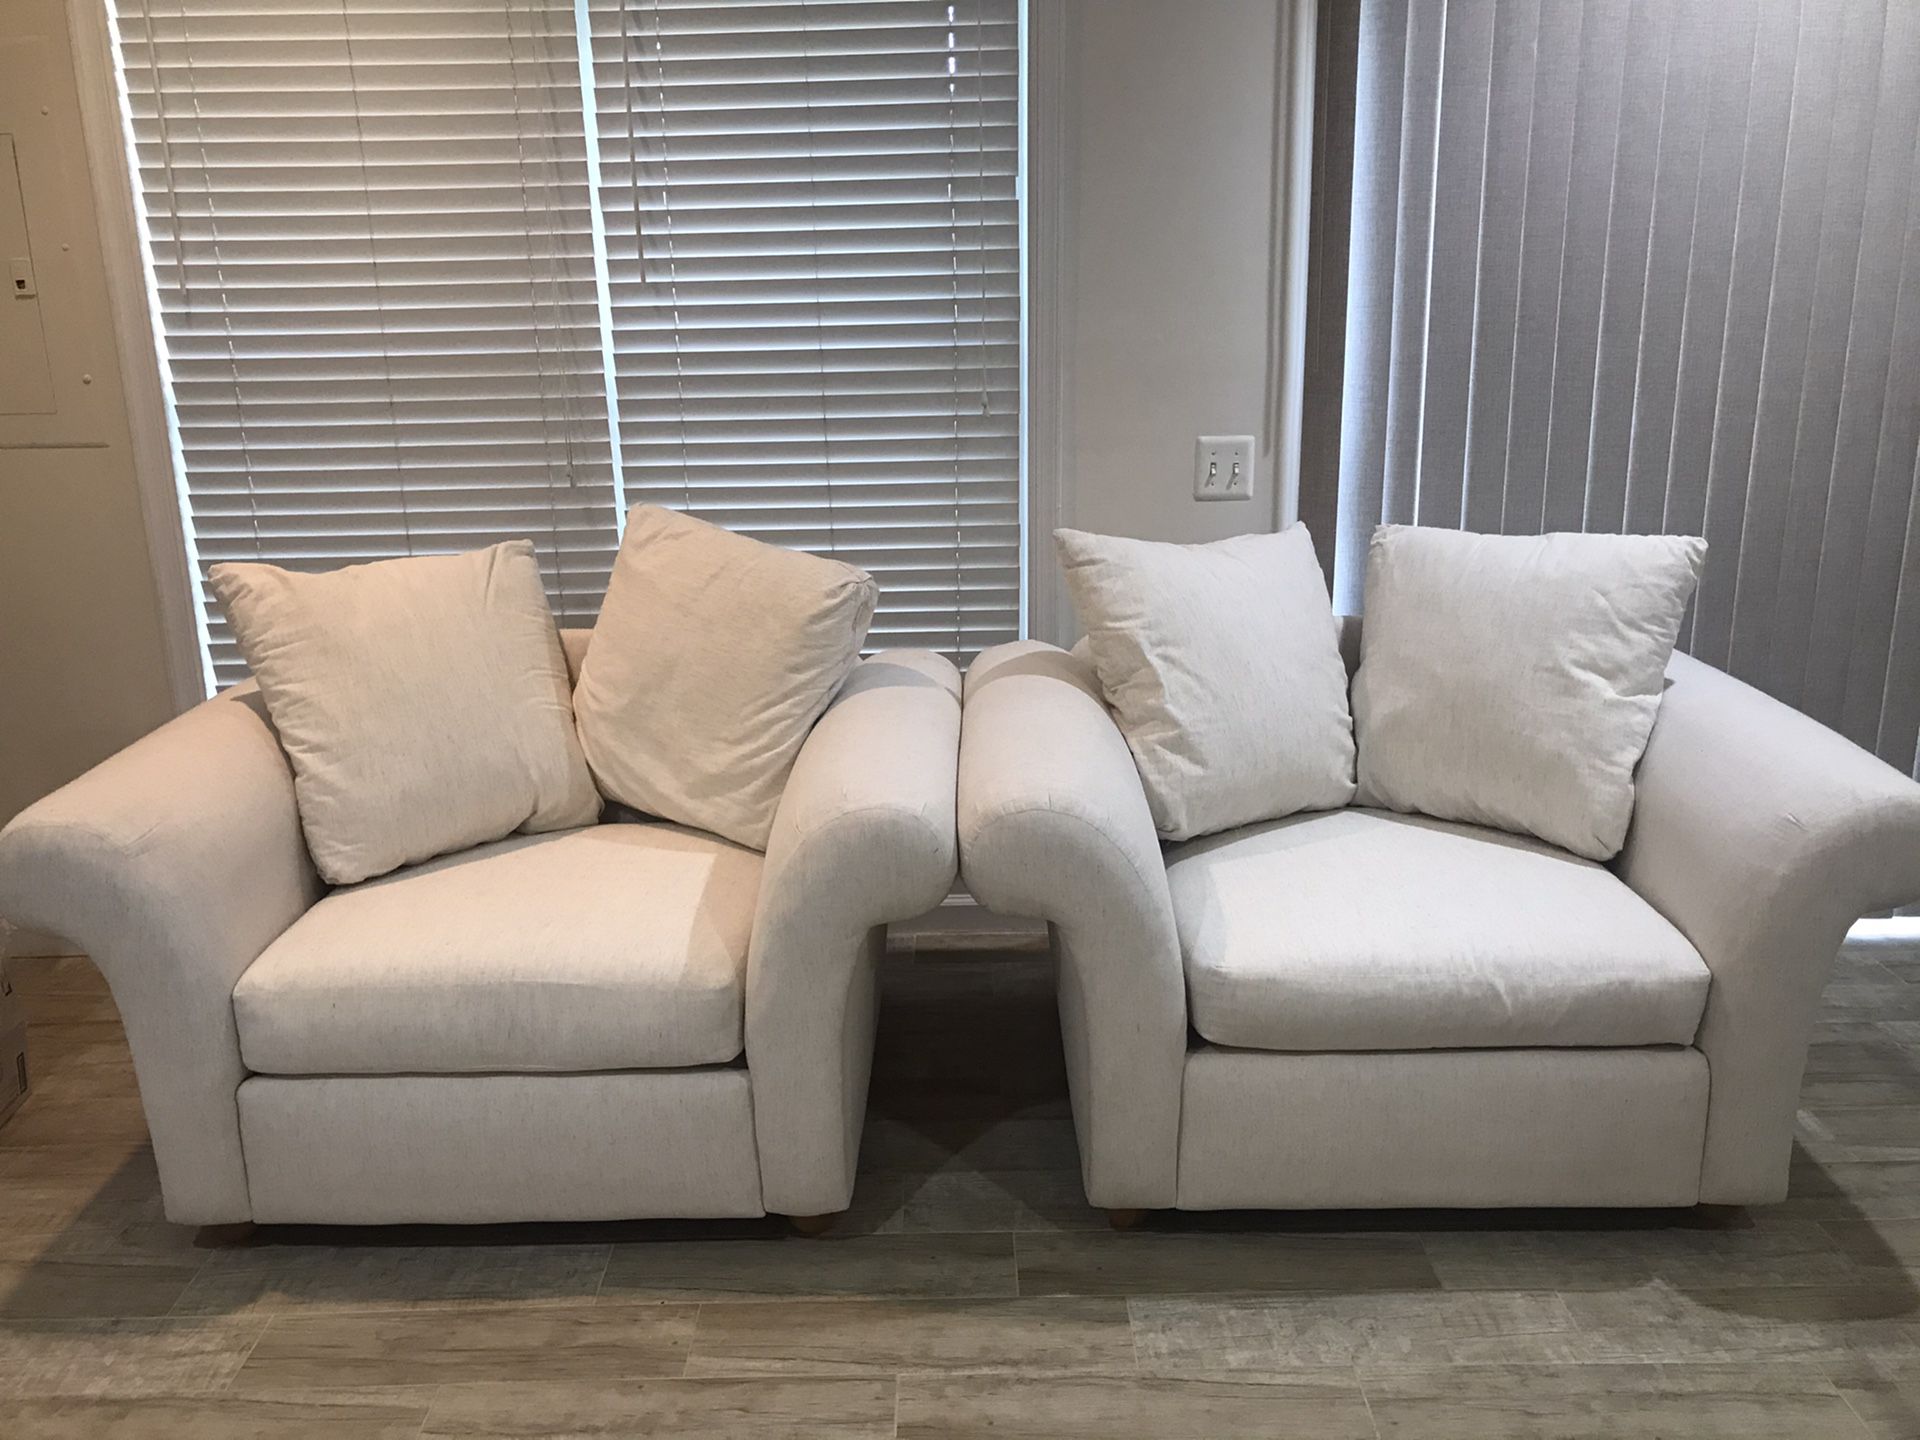 Two Oversized Chairs - $100 each